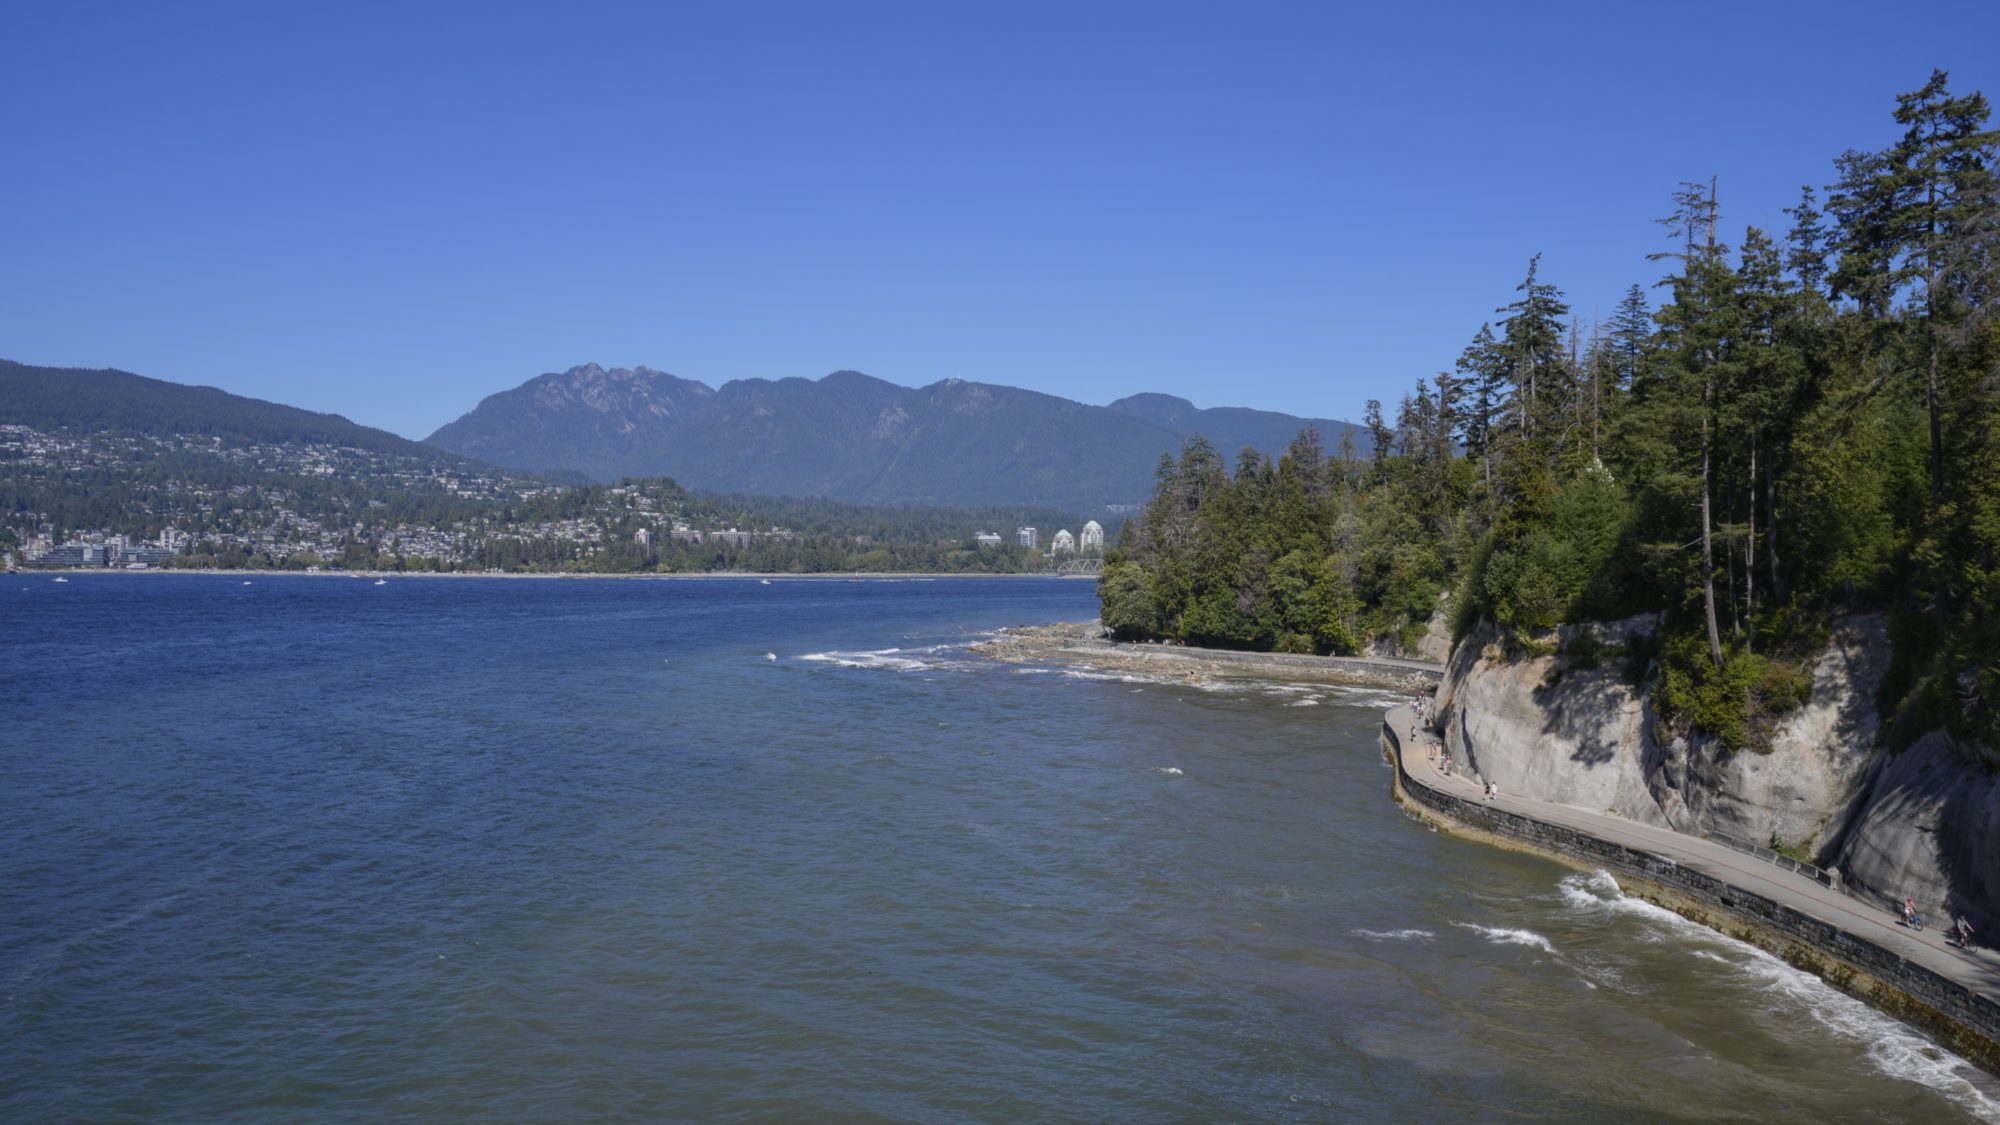 Part of the Stanley Park Seawall, and North Vancouver in the background